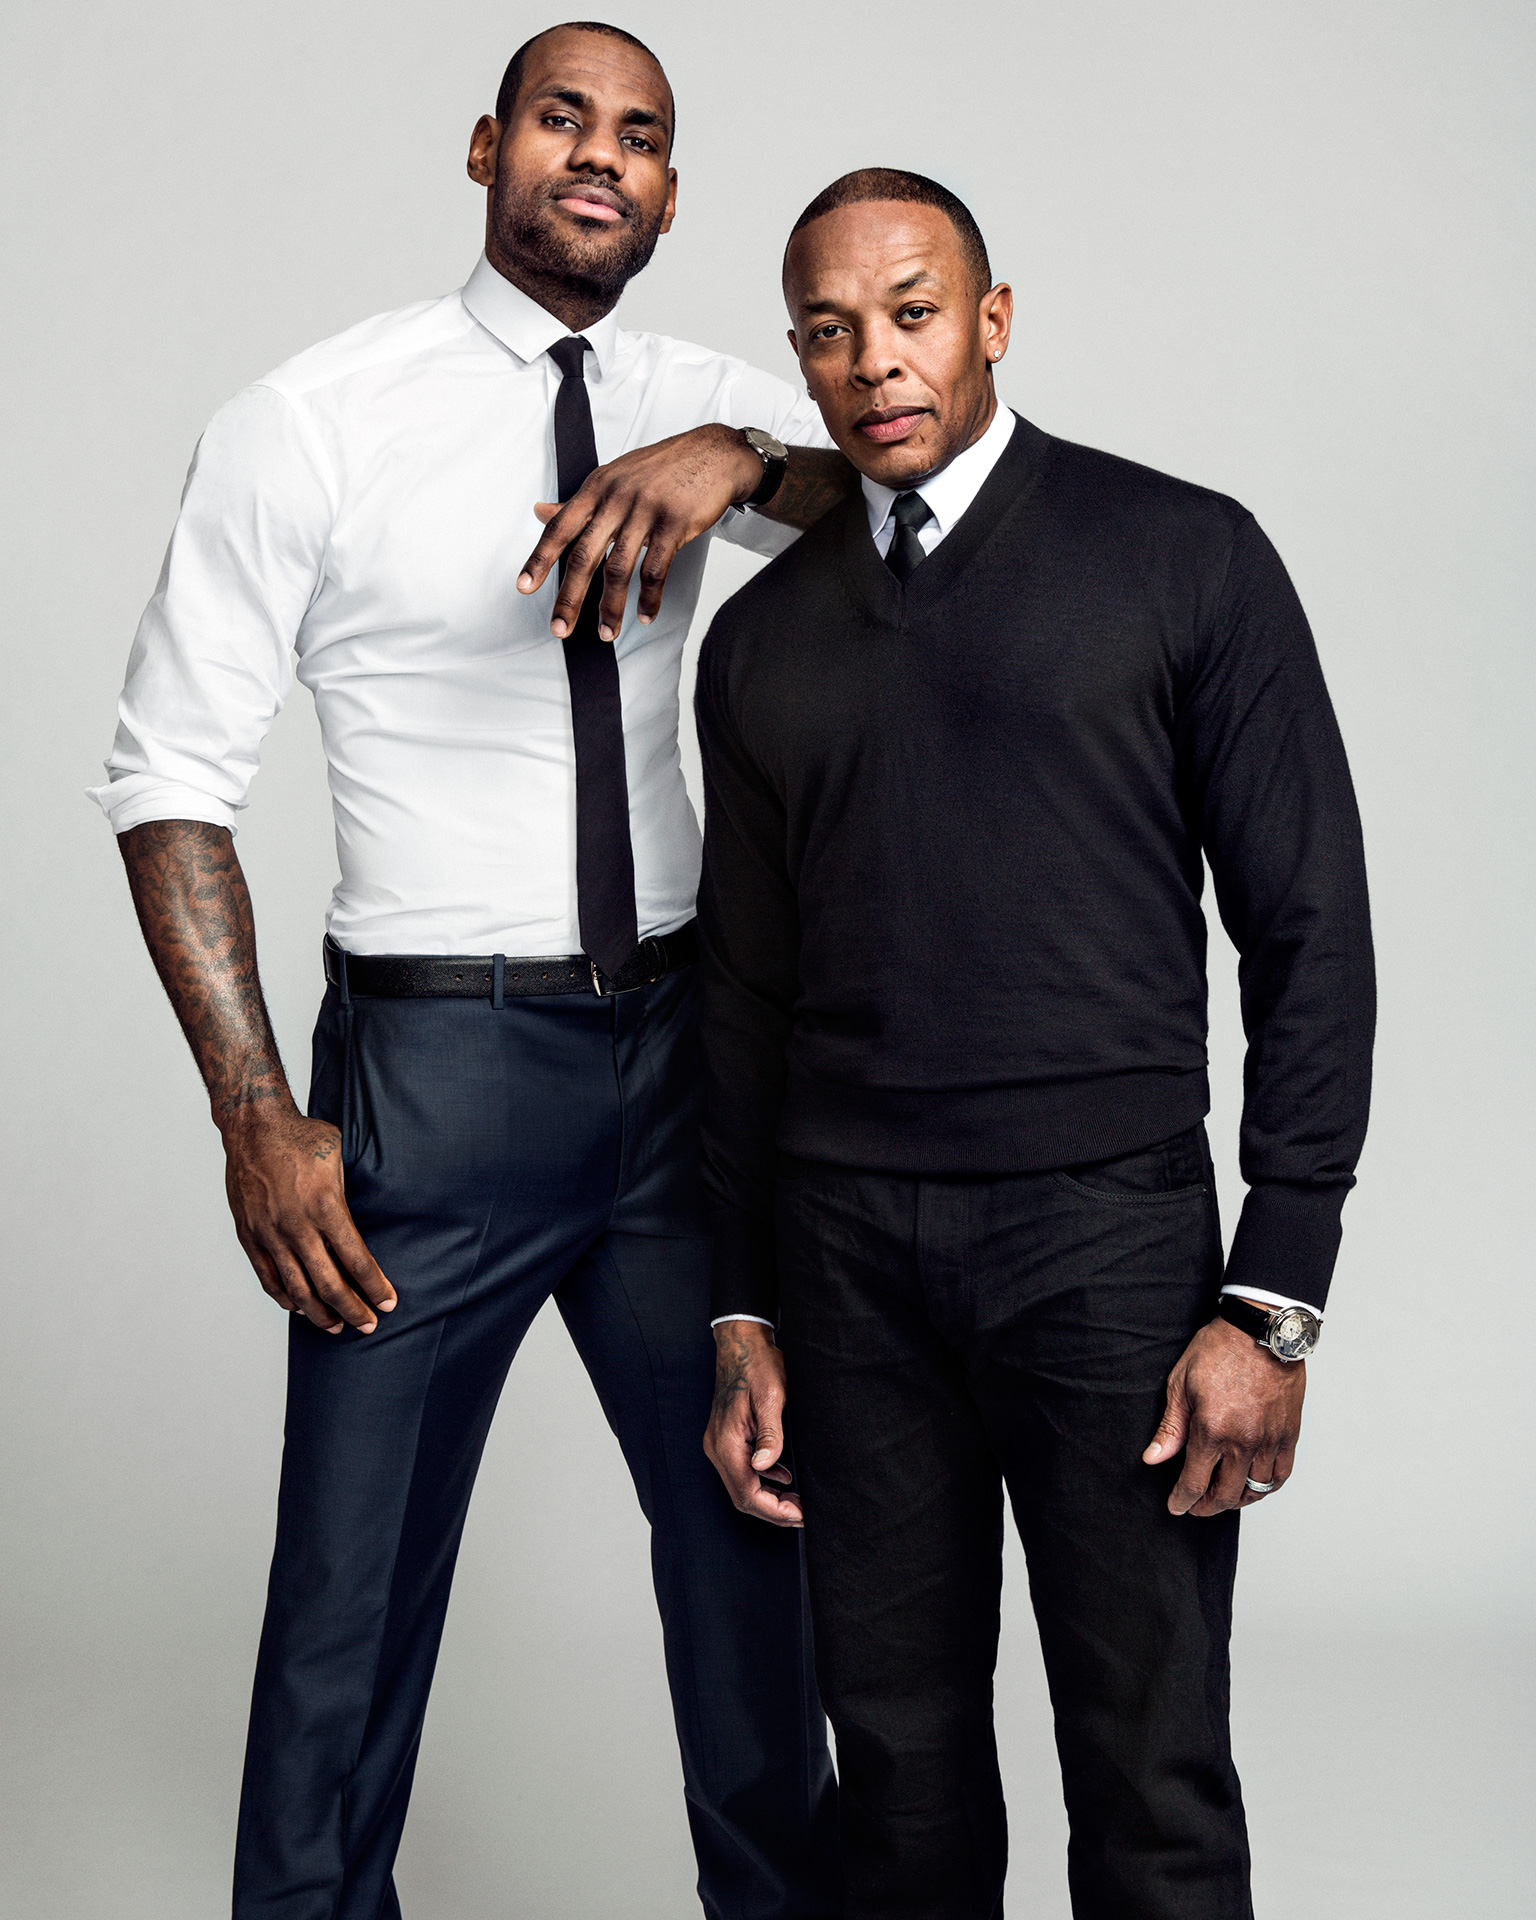 LeBron James and Dr. Dre team up to 